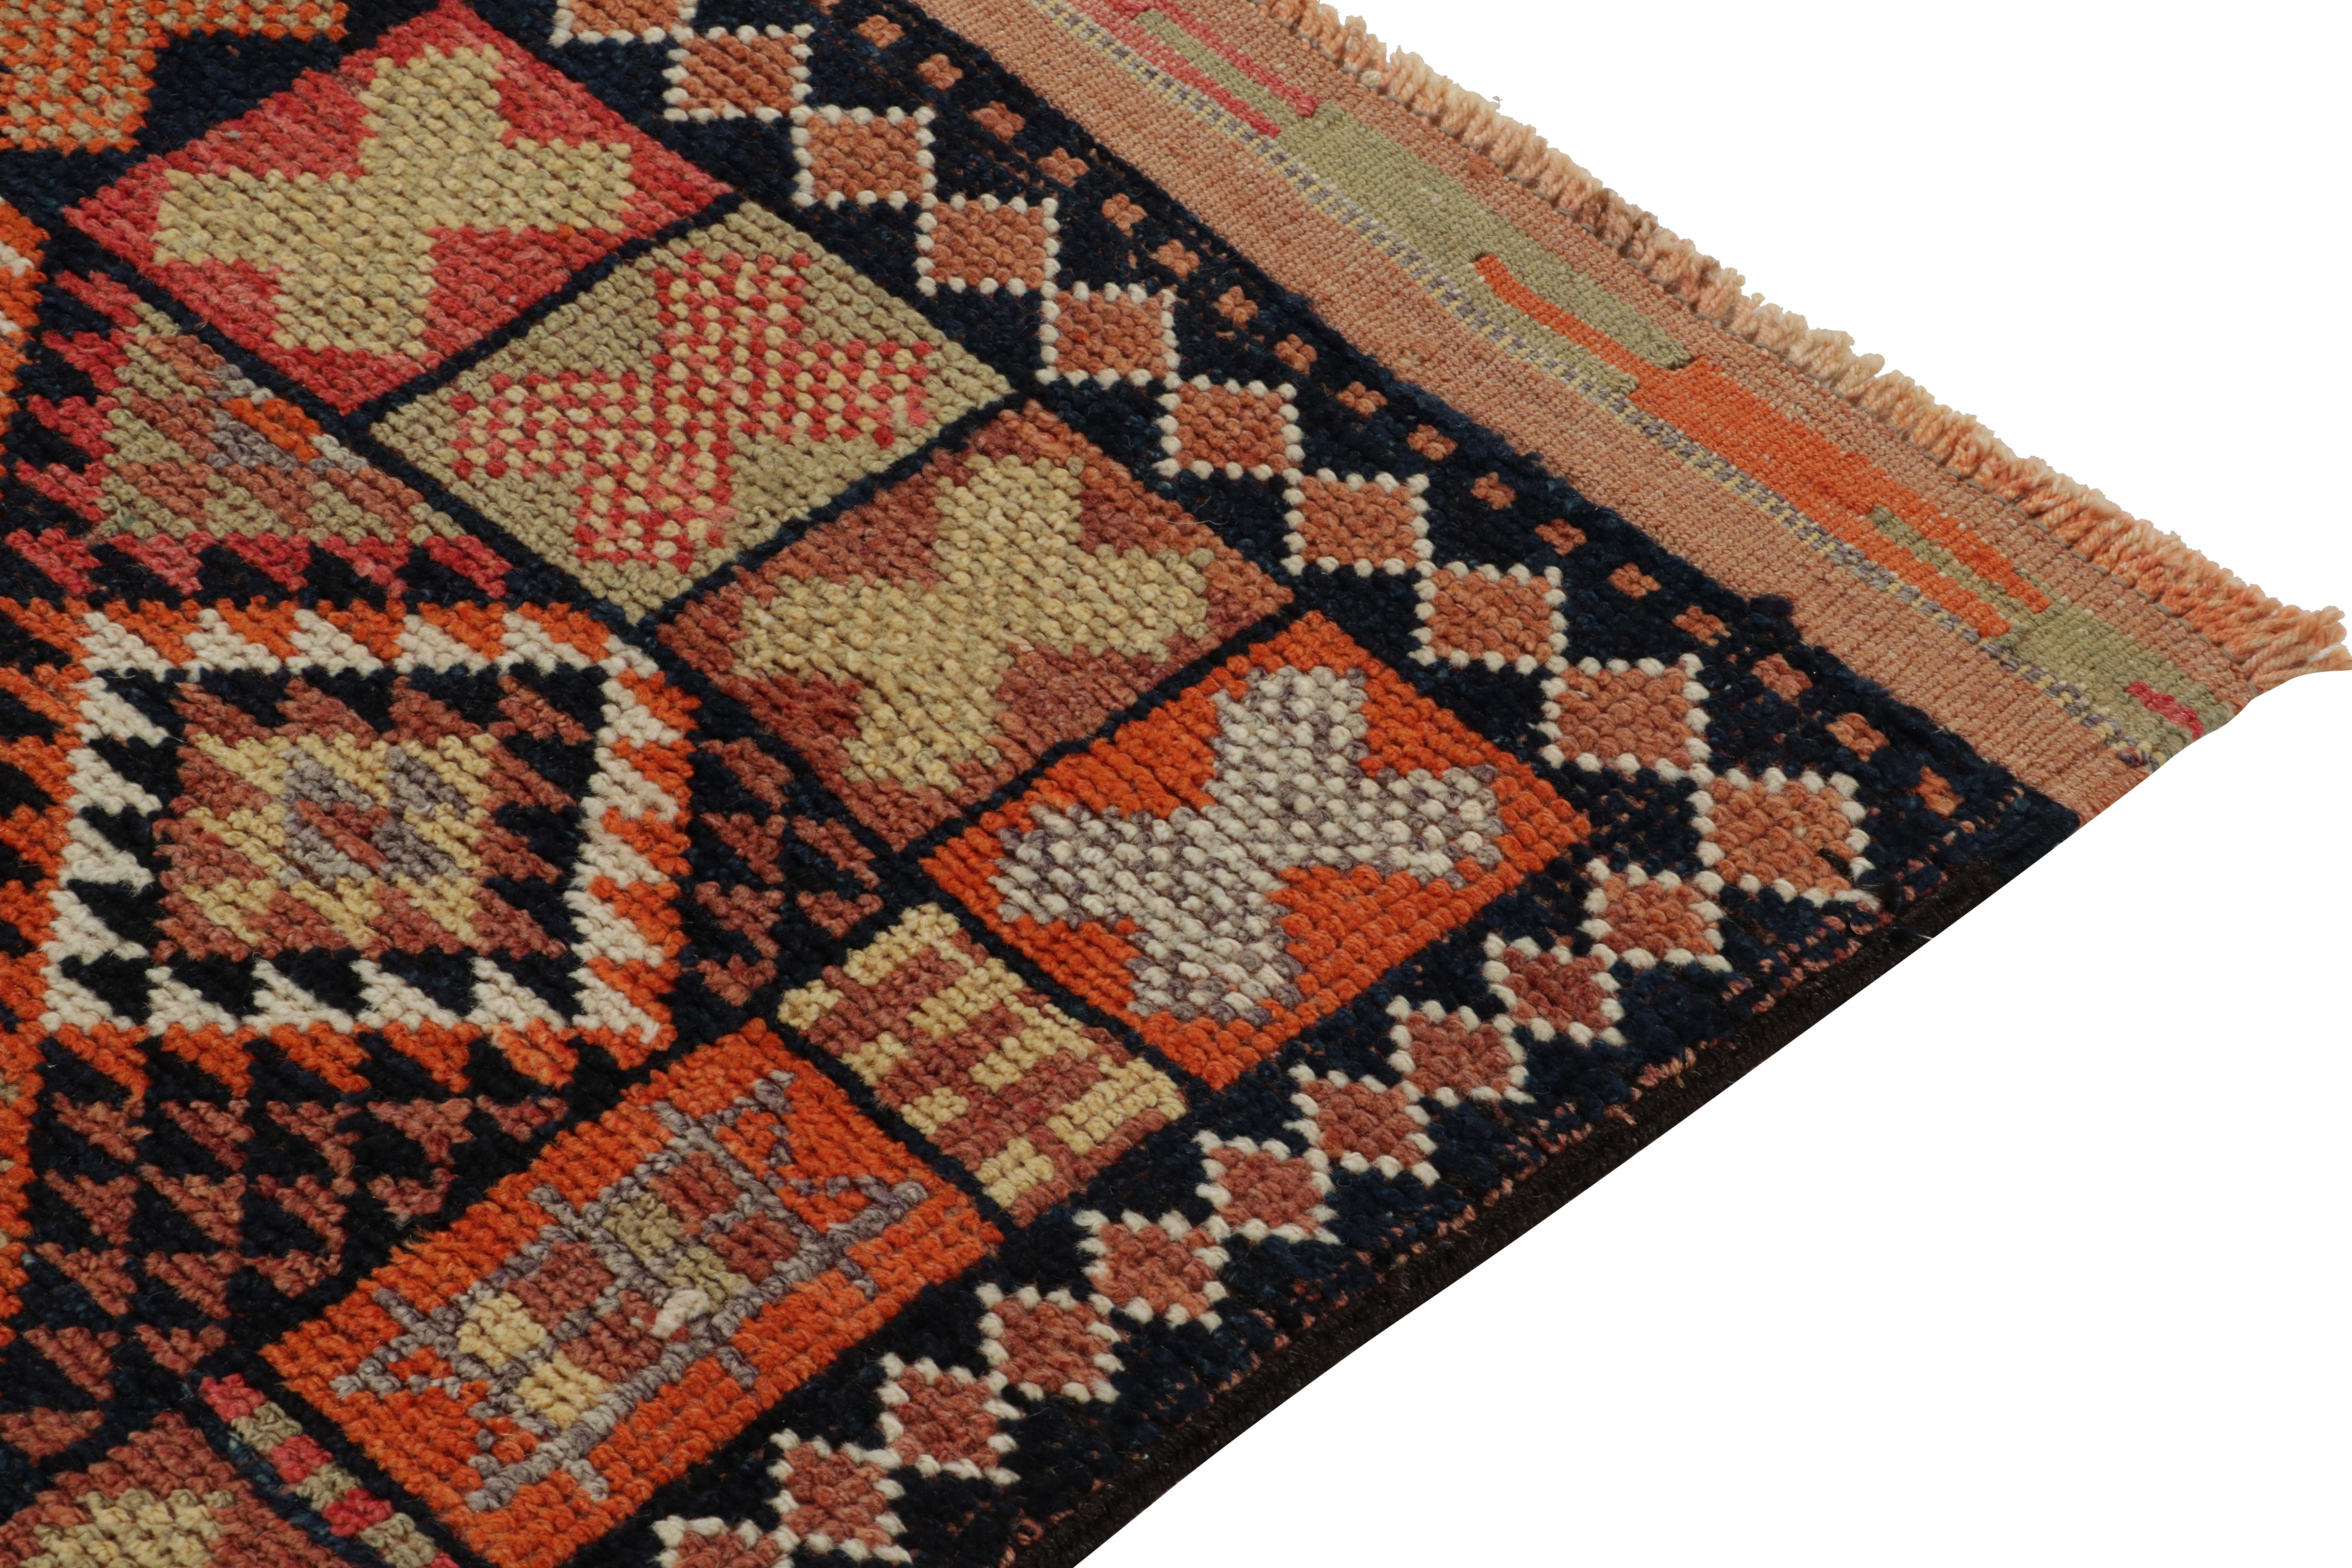 Vintage Turkish runner in Orange, Black & Beige Geometric Pattern by Rug & Kilim In Good Condition For Sale In Long Island City, NY